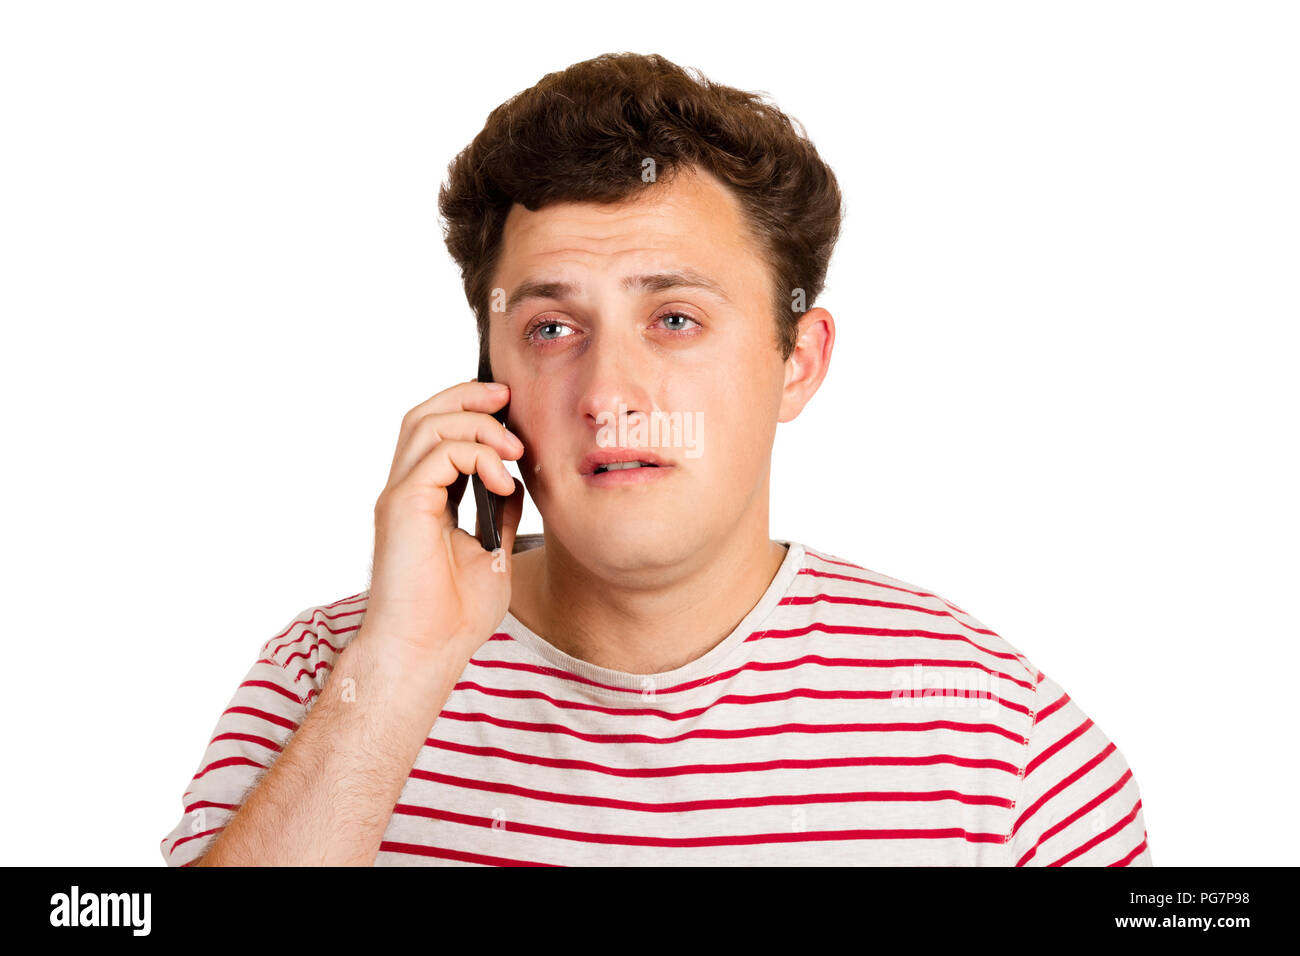 Young man crying over the bad news he is receiving on his phone. emotional man isolated on white background. Stock Photo